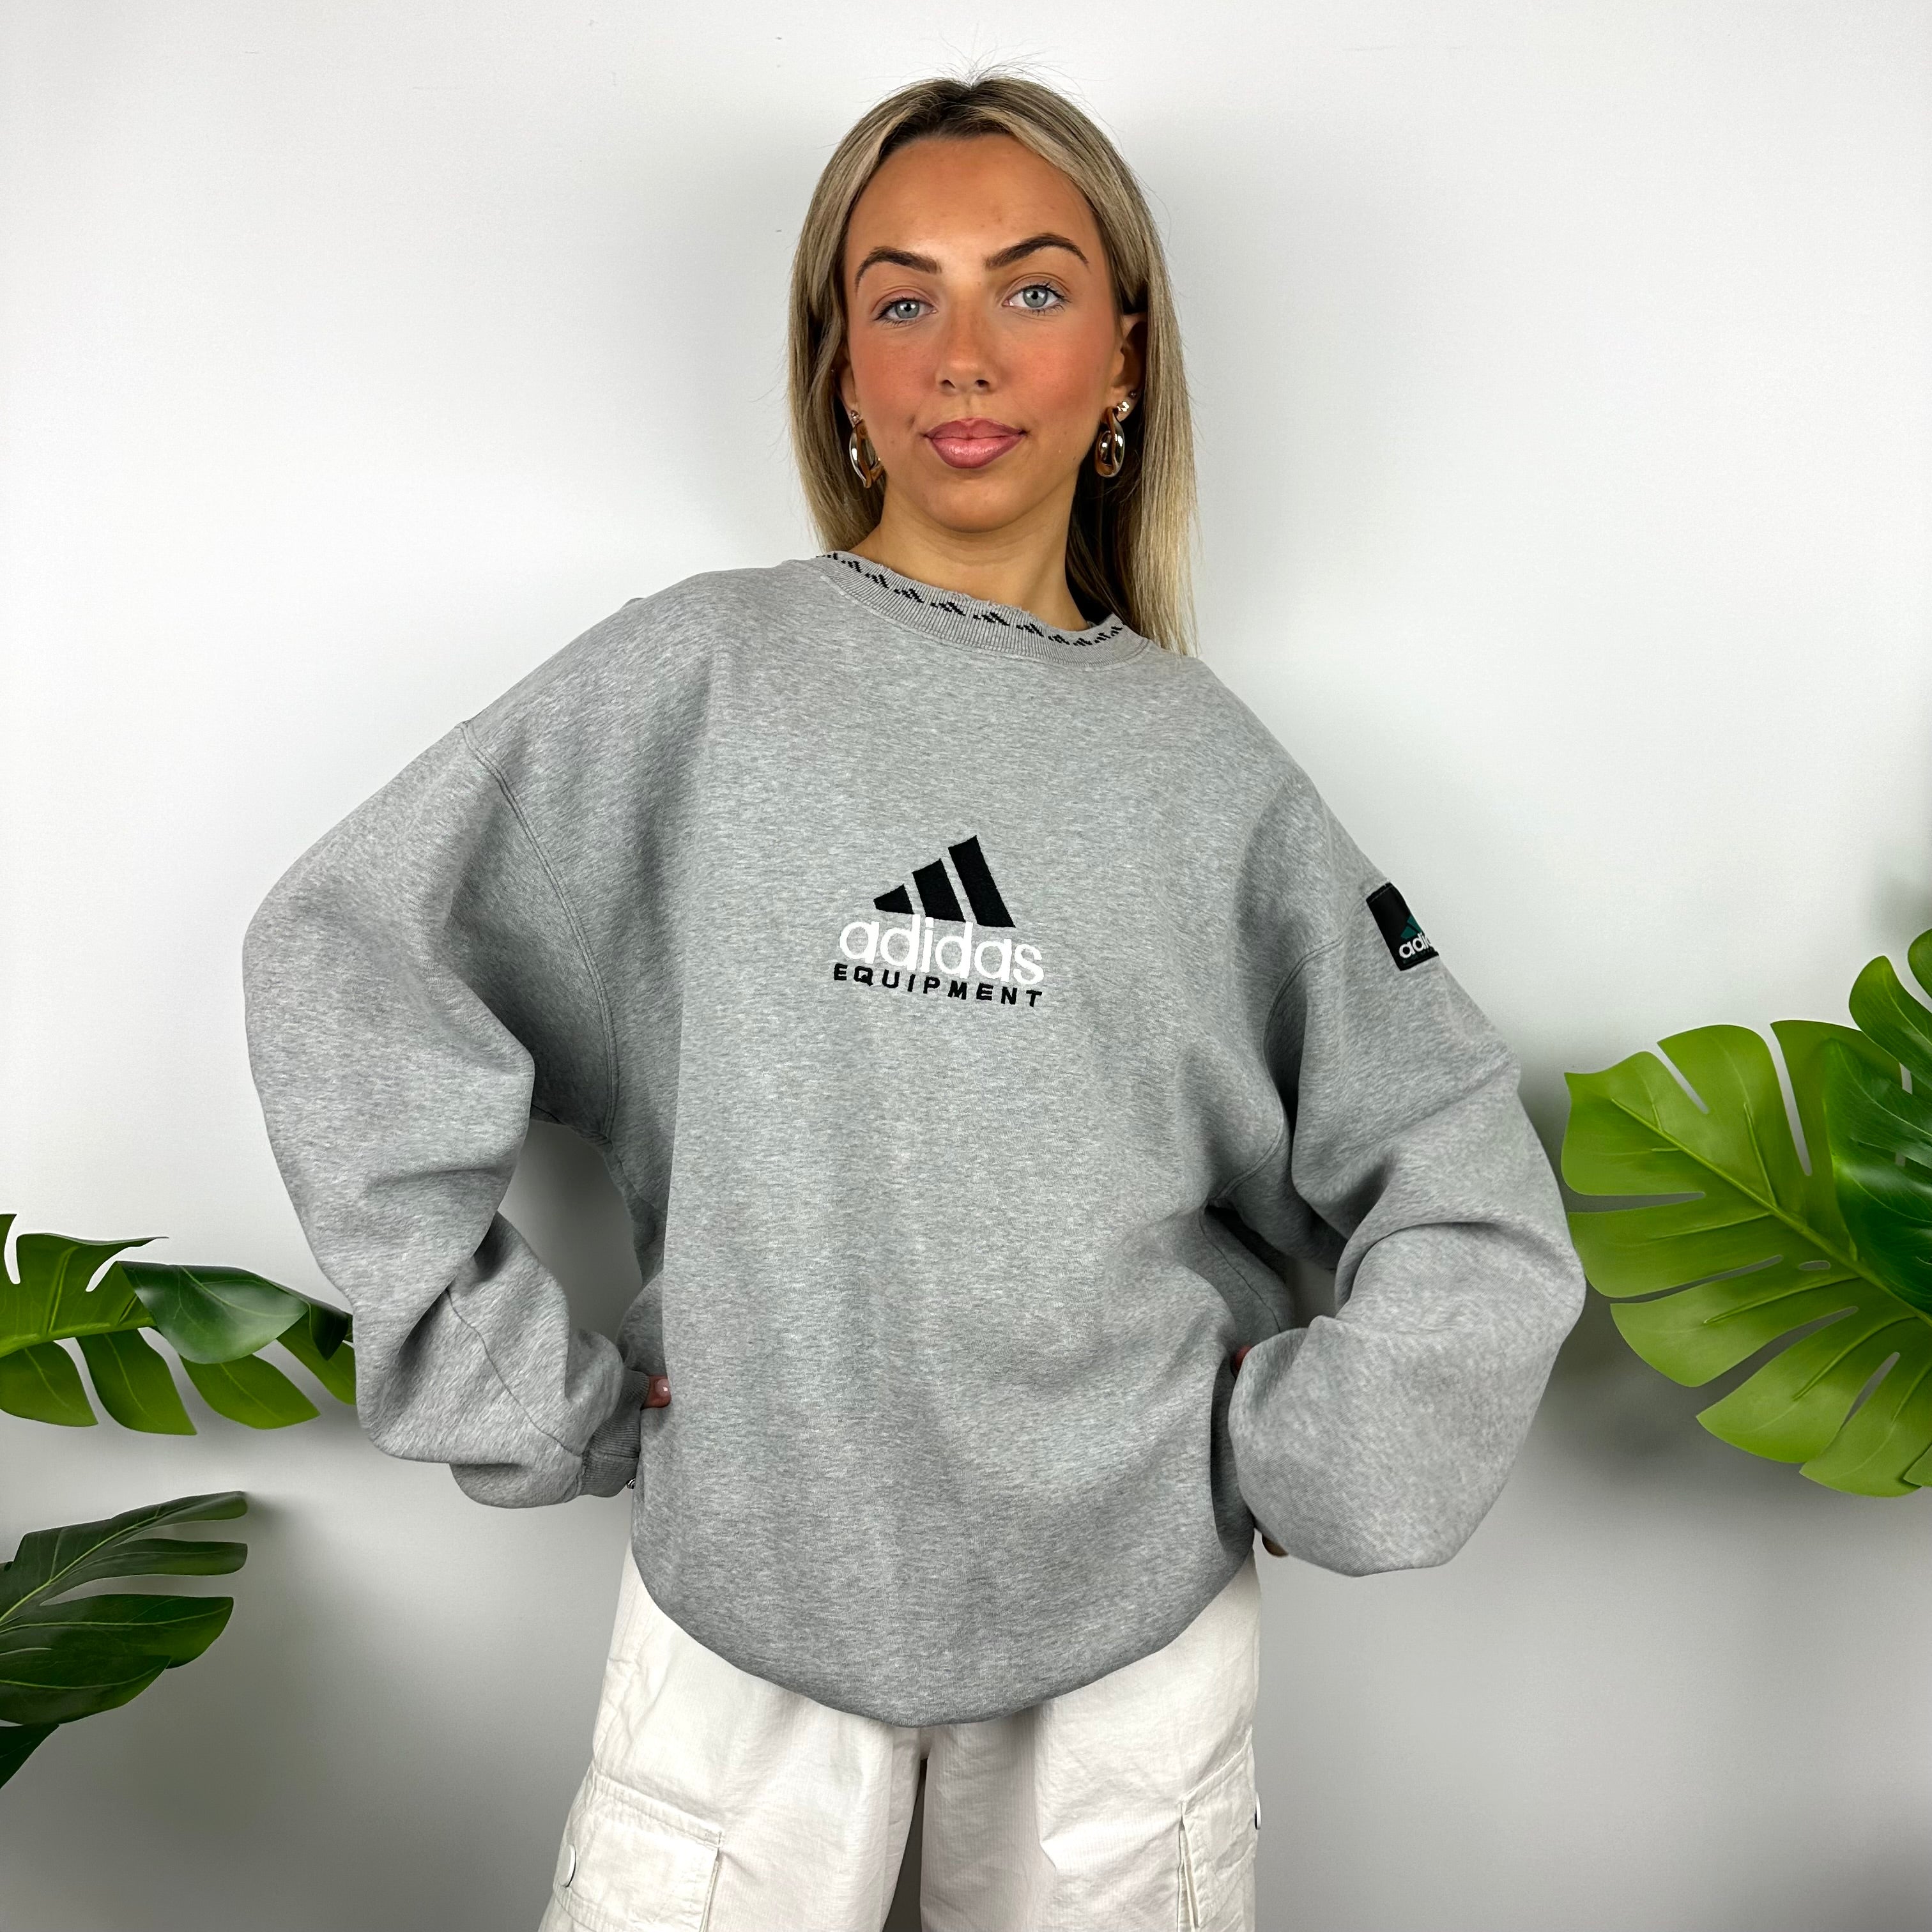 Adidas Equipment RARE Grey Embroidered Spell Out Sweatshirt (XL)